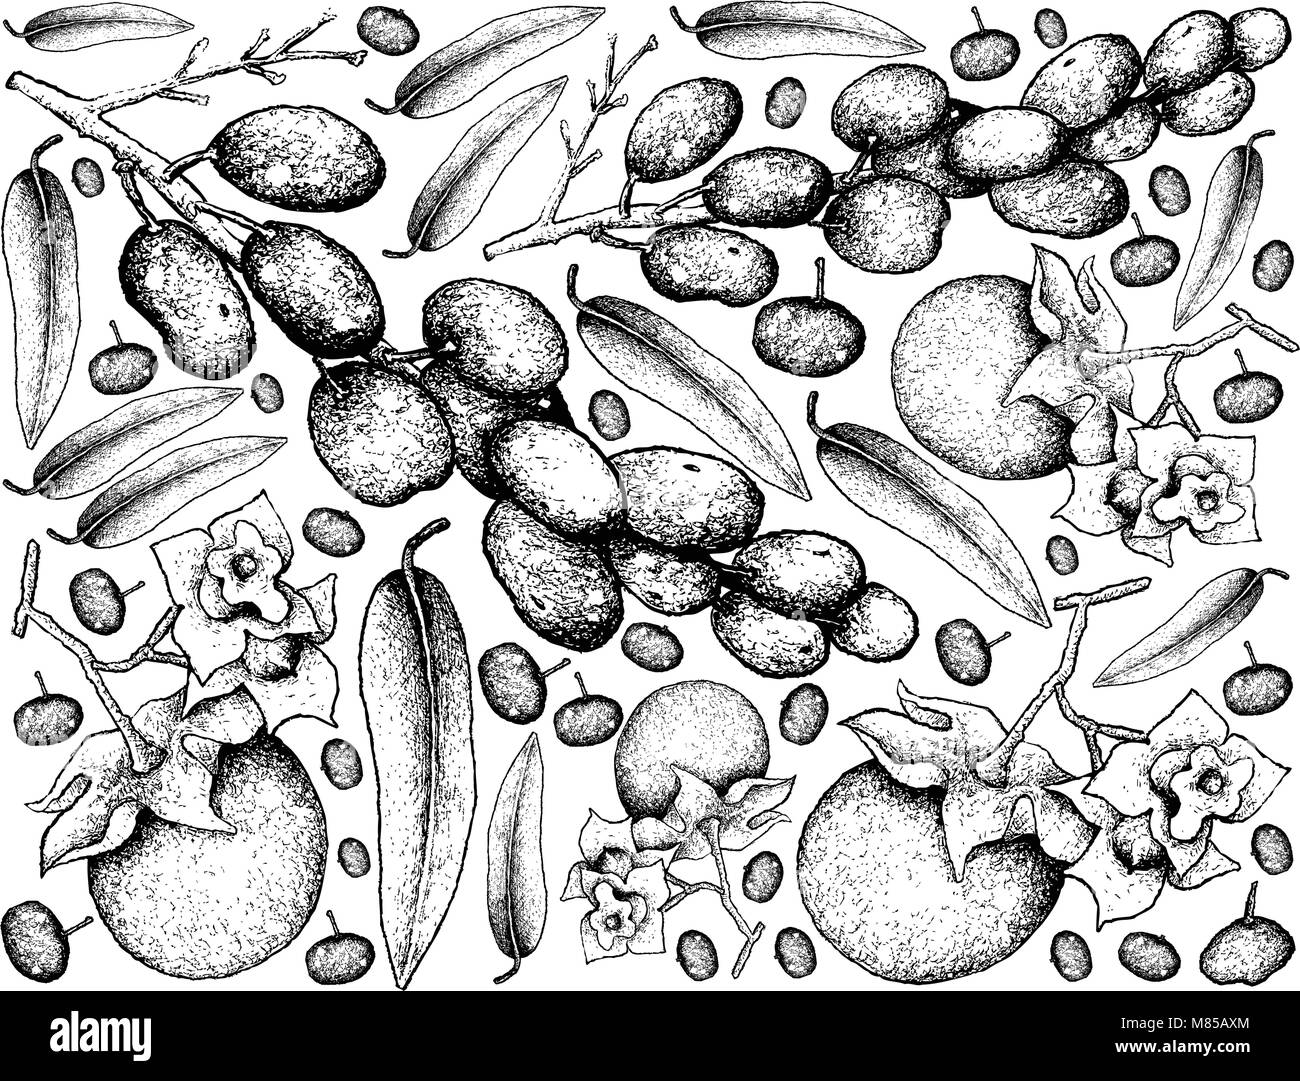 Tropical Fruit, Illustration Wallpaper Background of Hand Drawn Sketch Ripe and Sweet Malabar Ebony or Diospyros Malabarica Fruits. Stock Vector